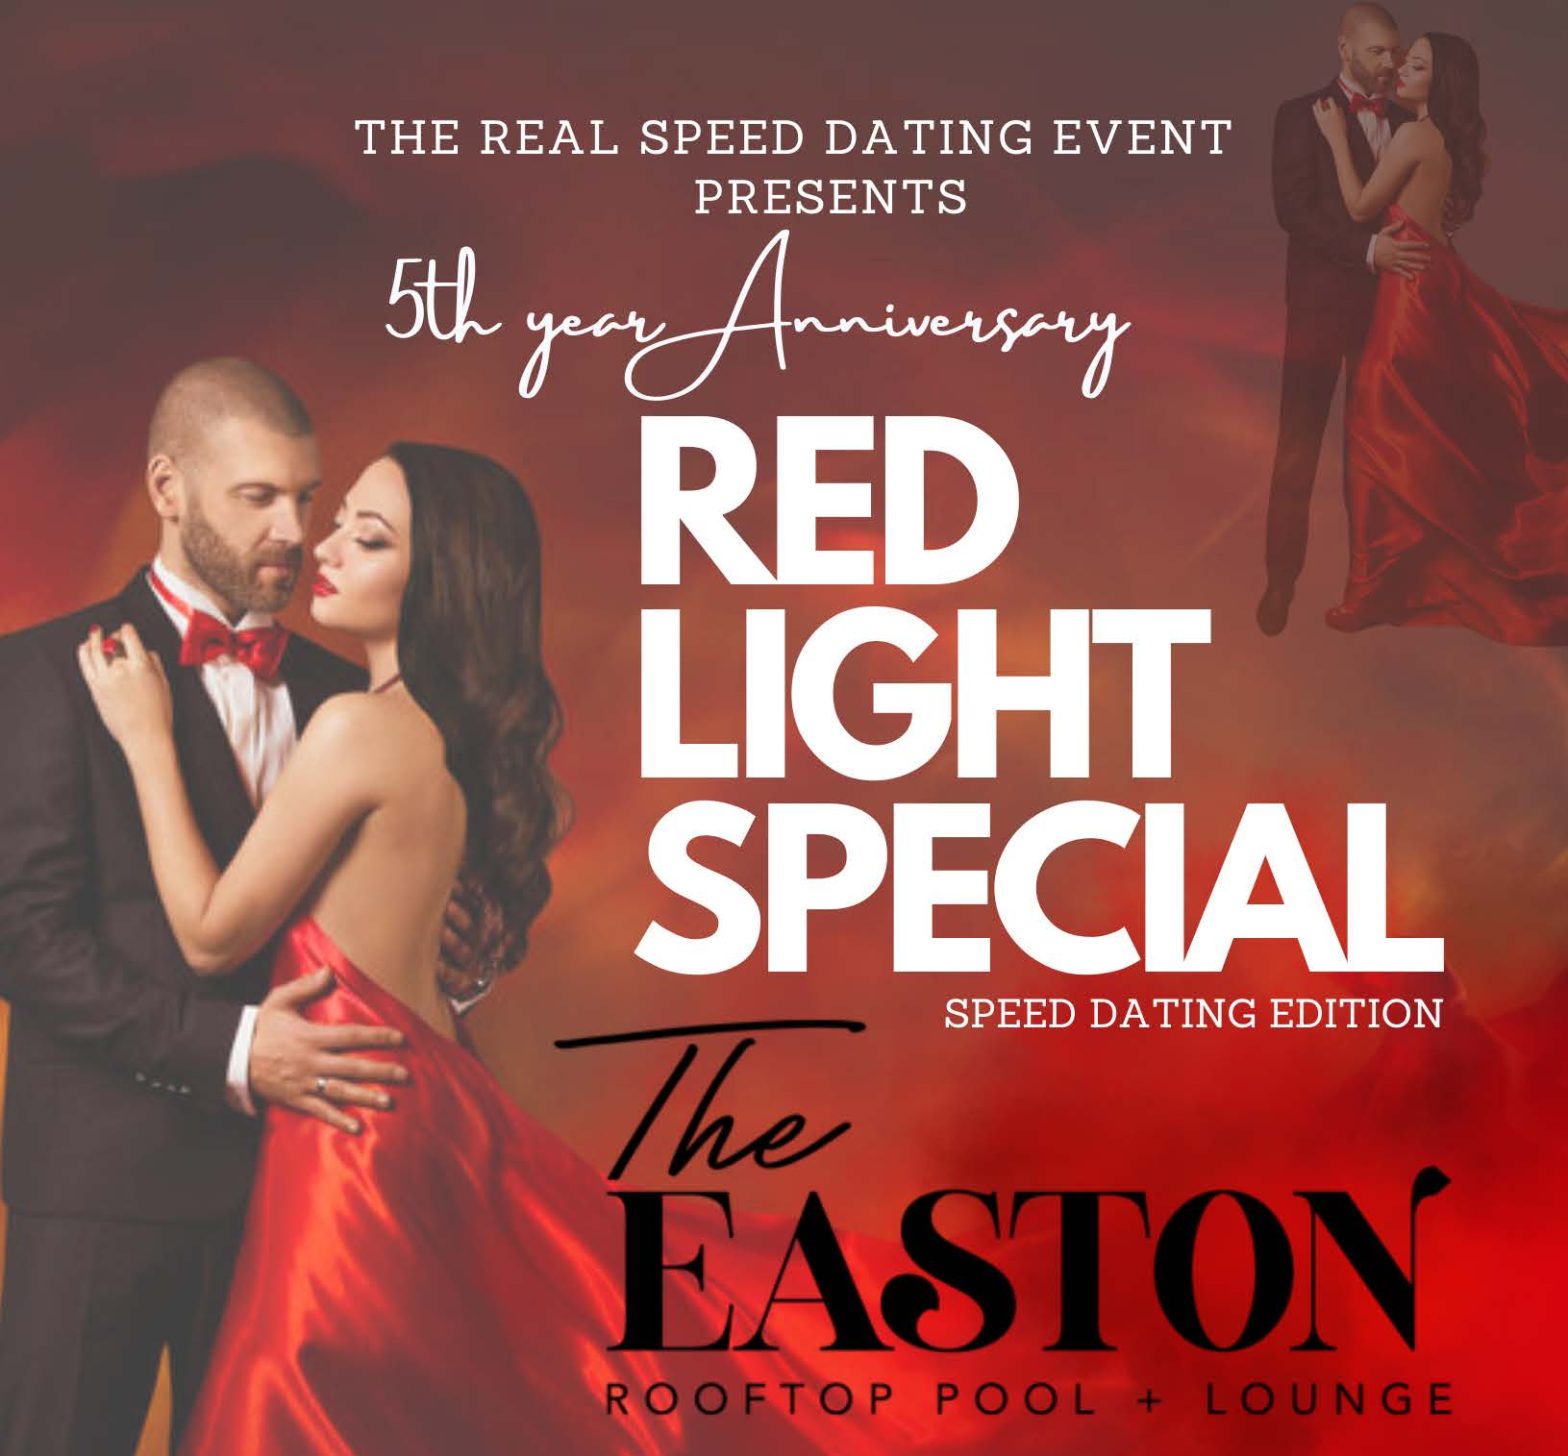 Featured image for post: The Real Speed Dating: 5th Anniversary Event